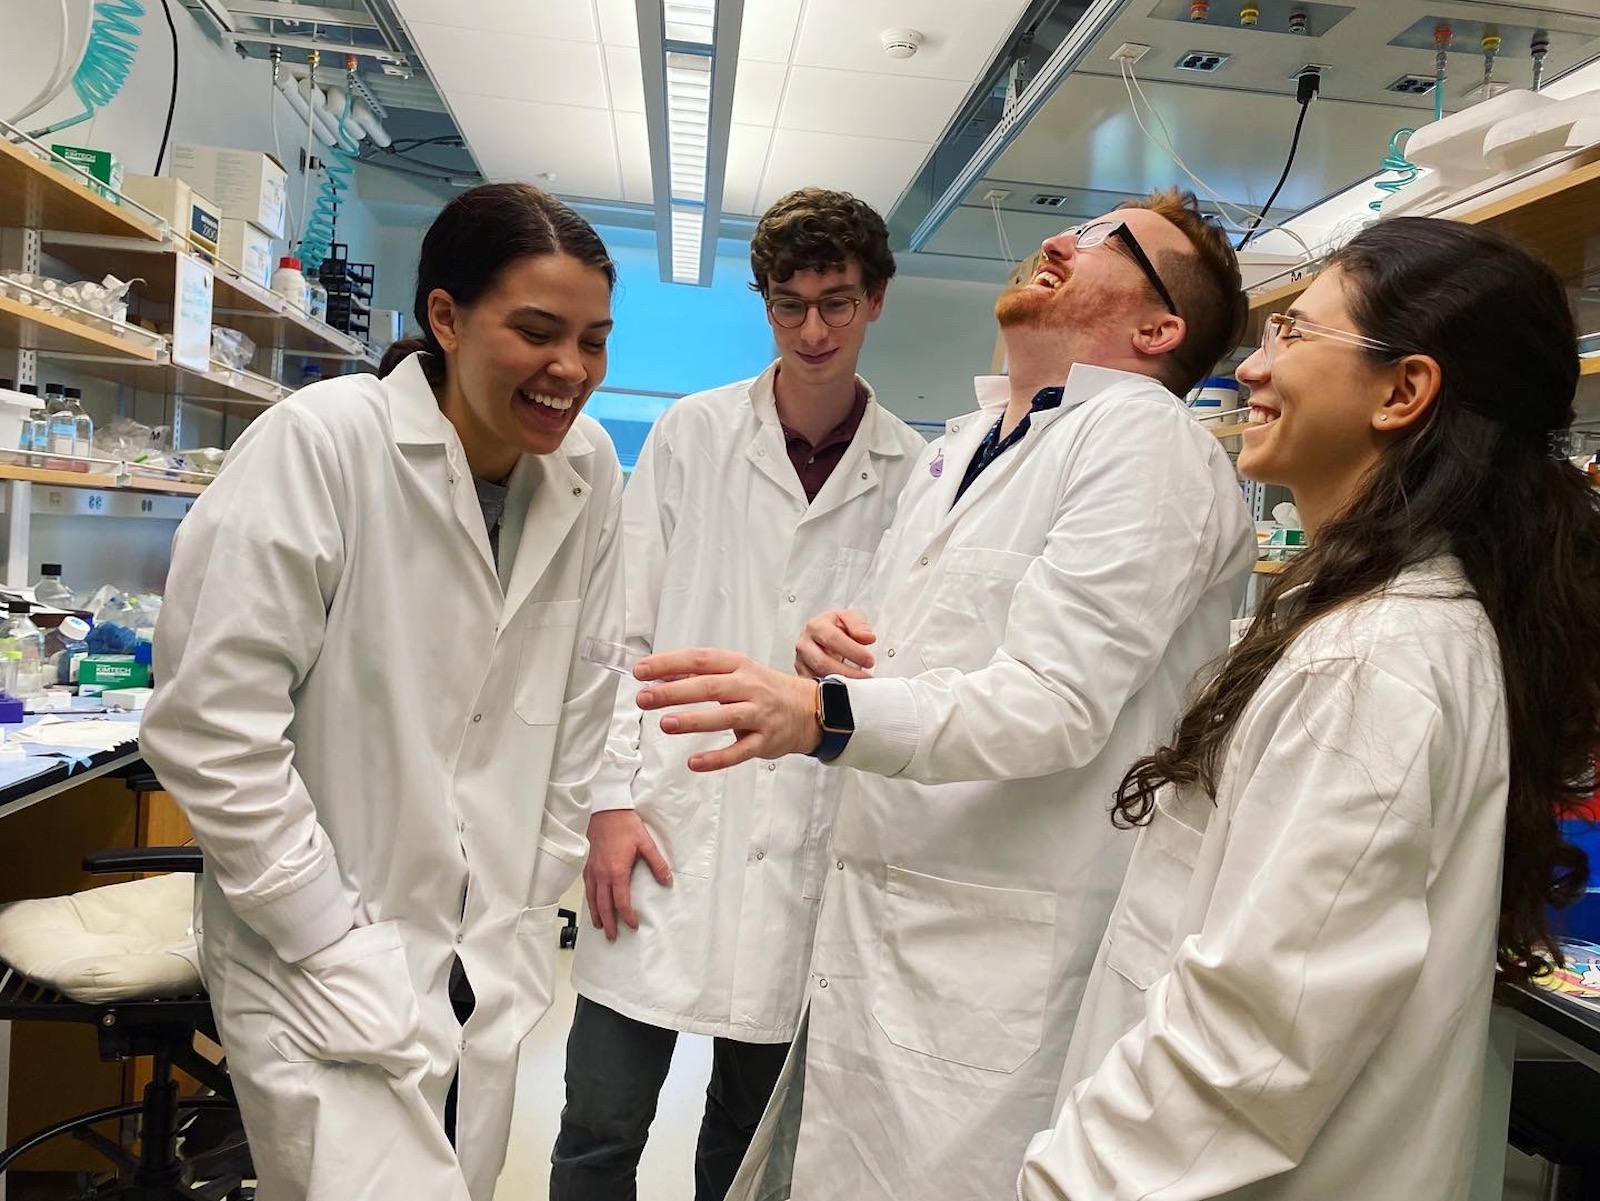 Class of 2022: Lucy Britto broadens access to biomedical science community through mentoring